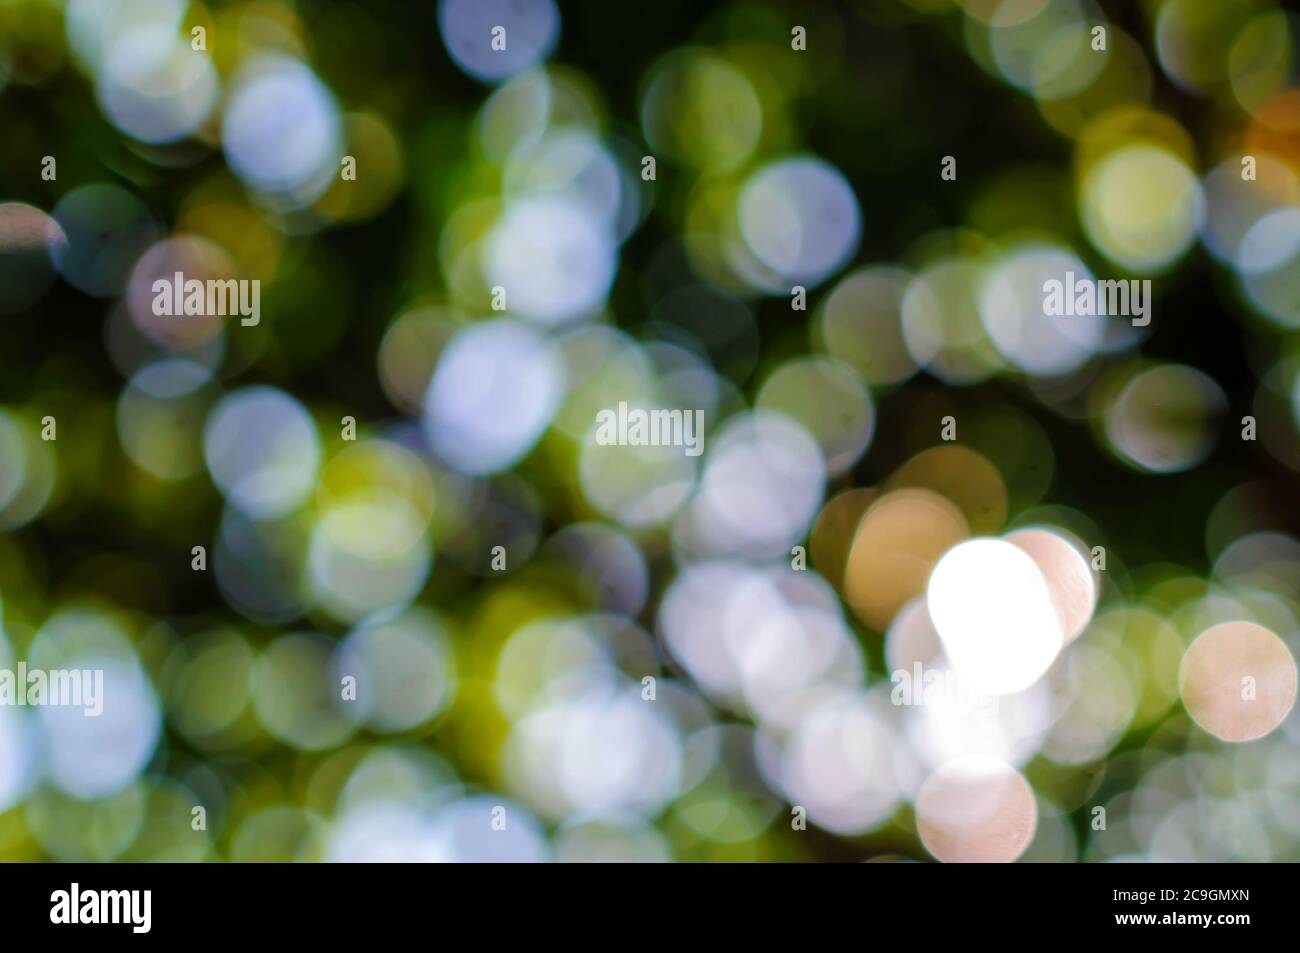 Abstract natural green bokeh background, blurred and defocused ...